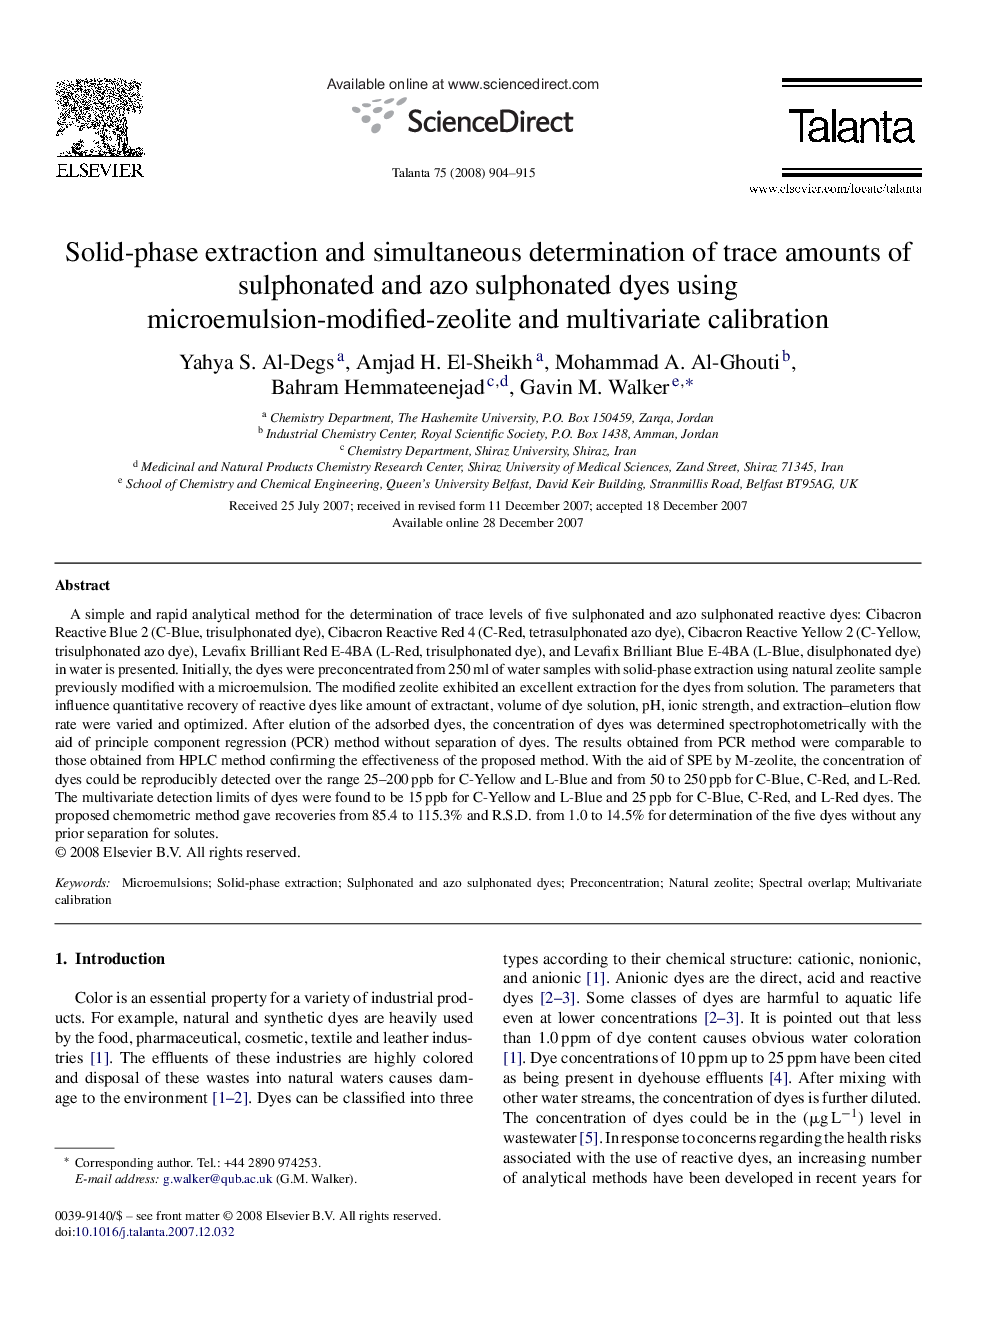 Solid-phase extraction and simultaneous determination of trace amounts of sulphonated and azo sulphonated dyes using microemulsion-modified-zeolite and multivariate calibration